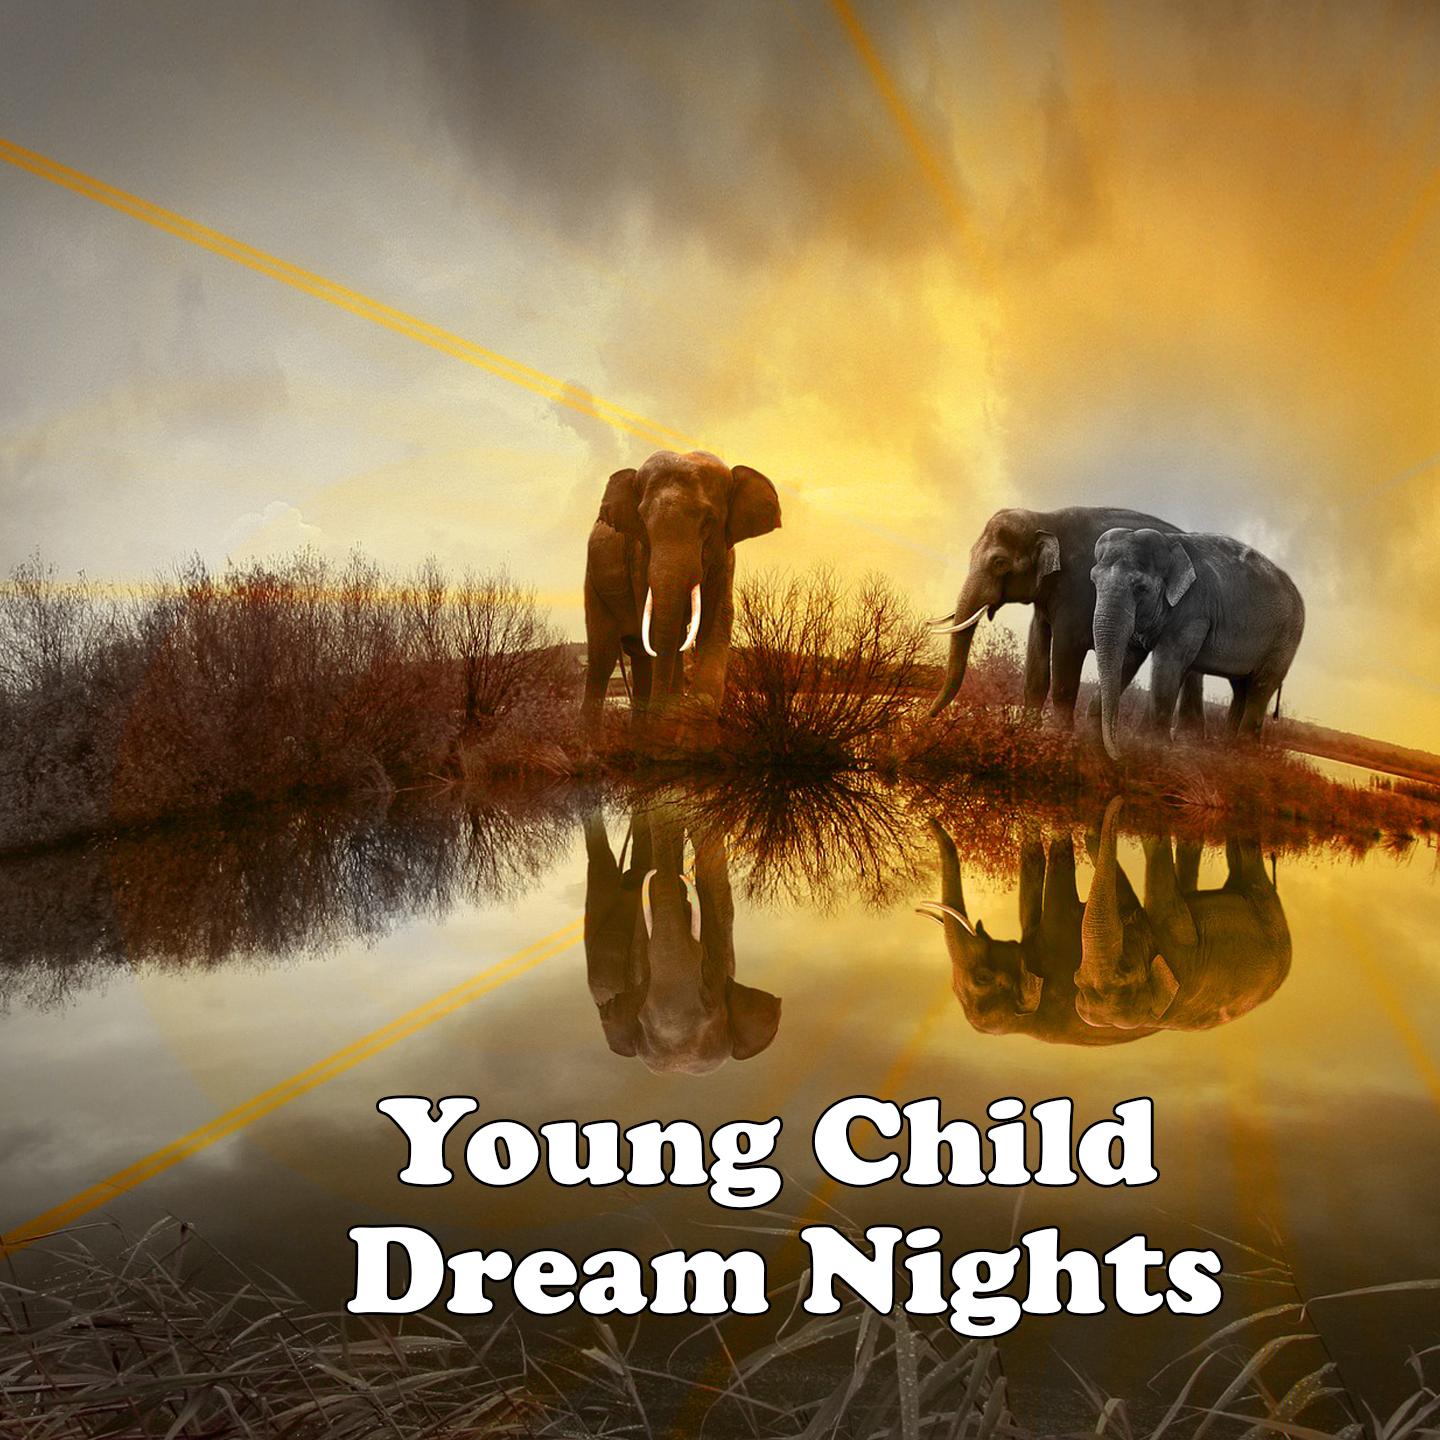 Young Child Dream Nights